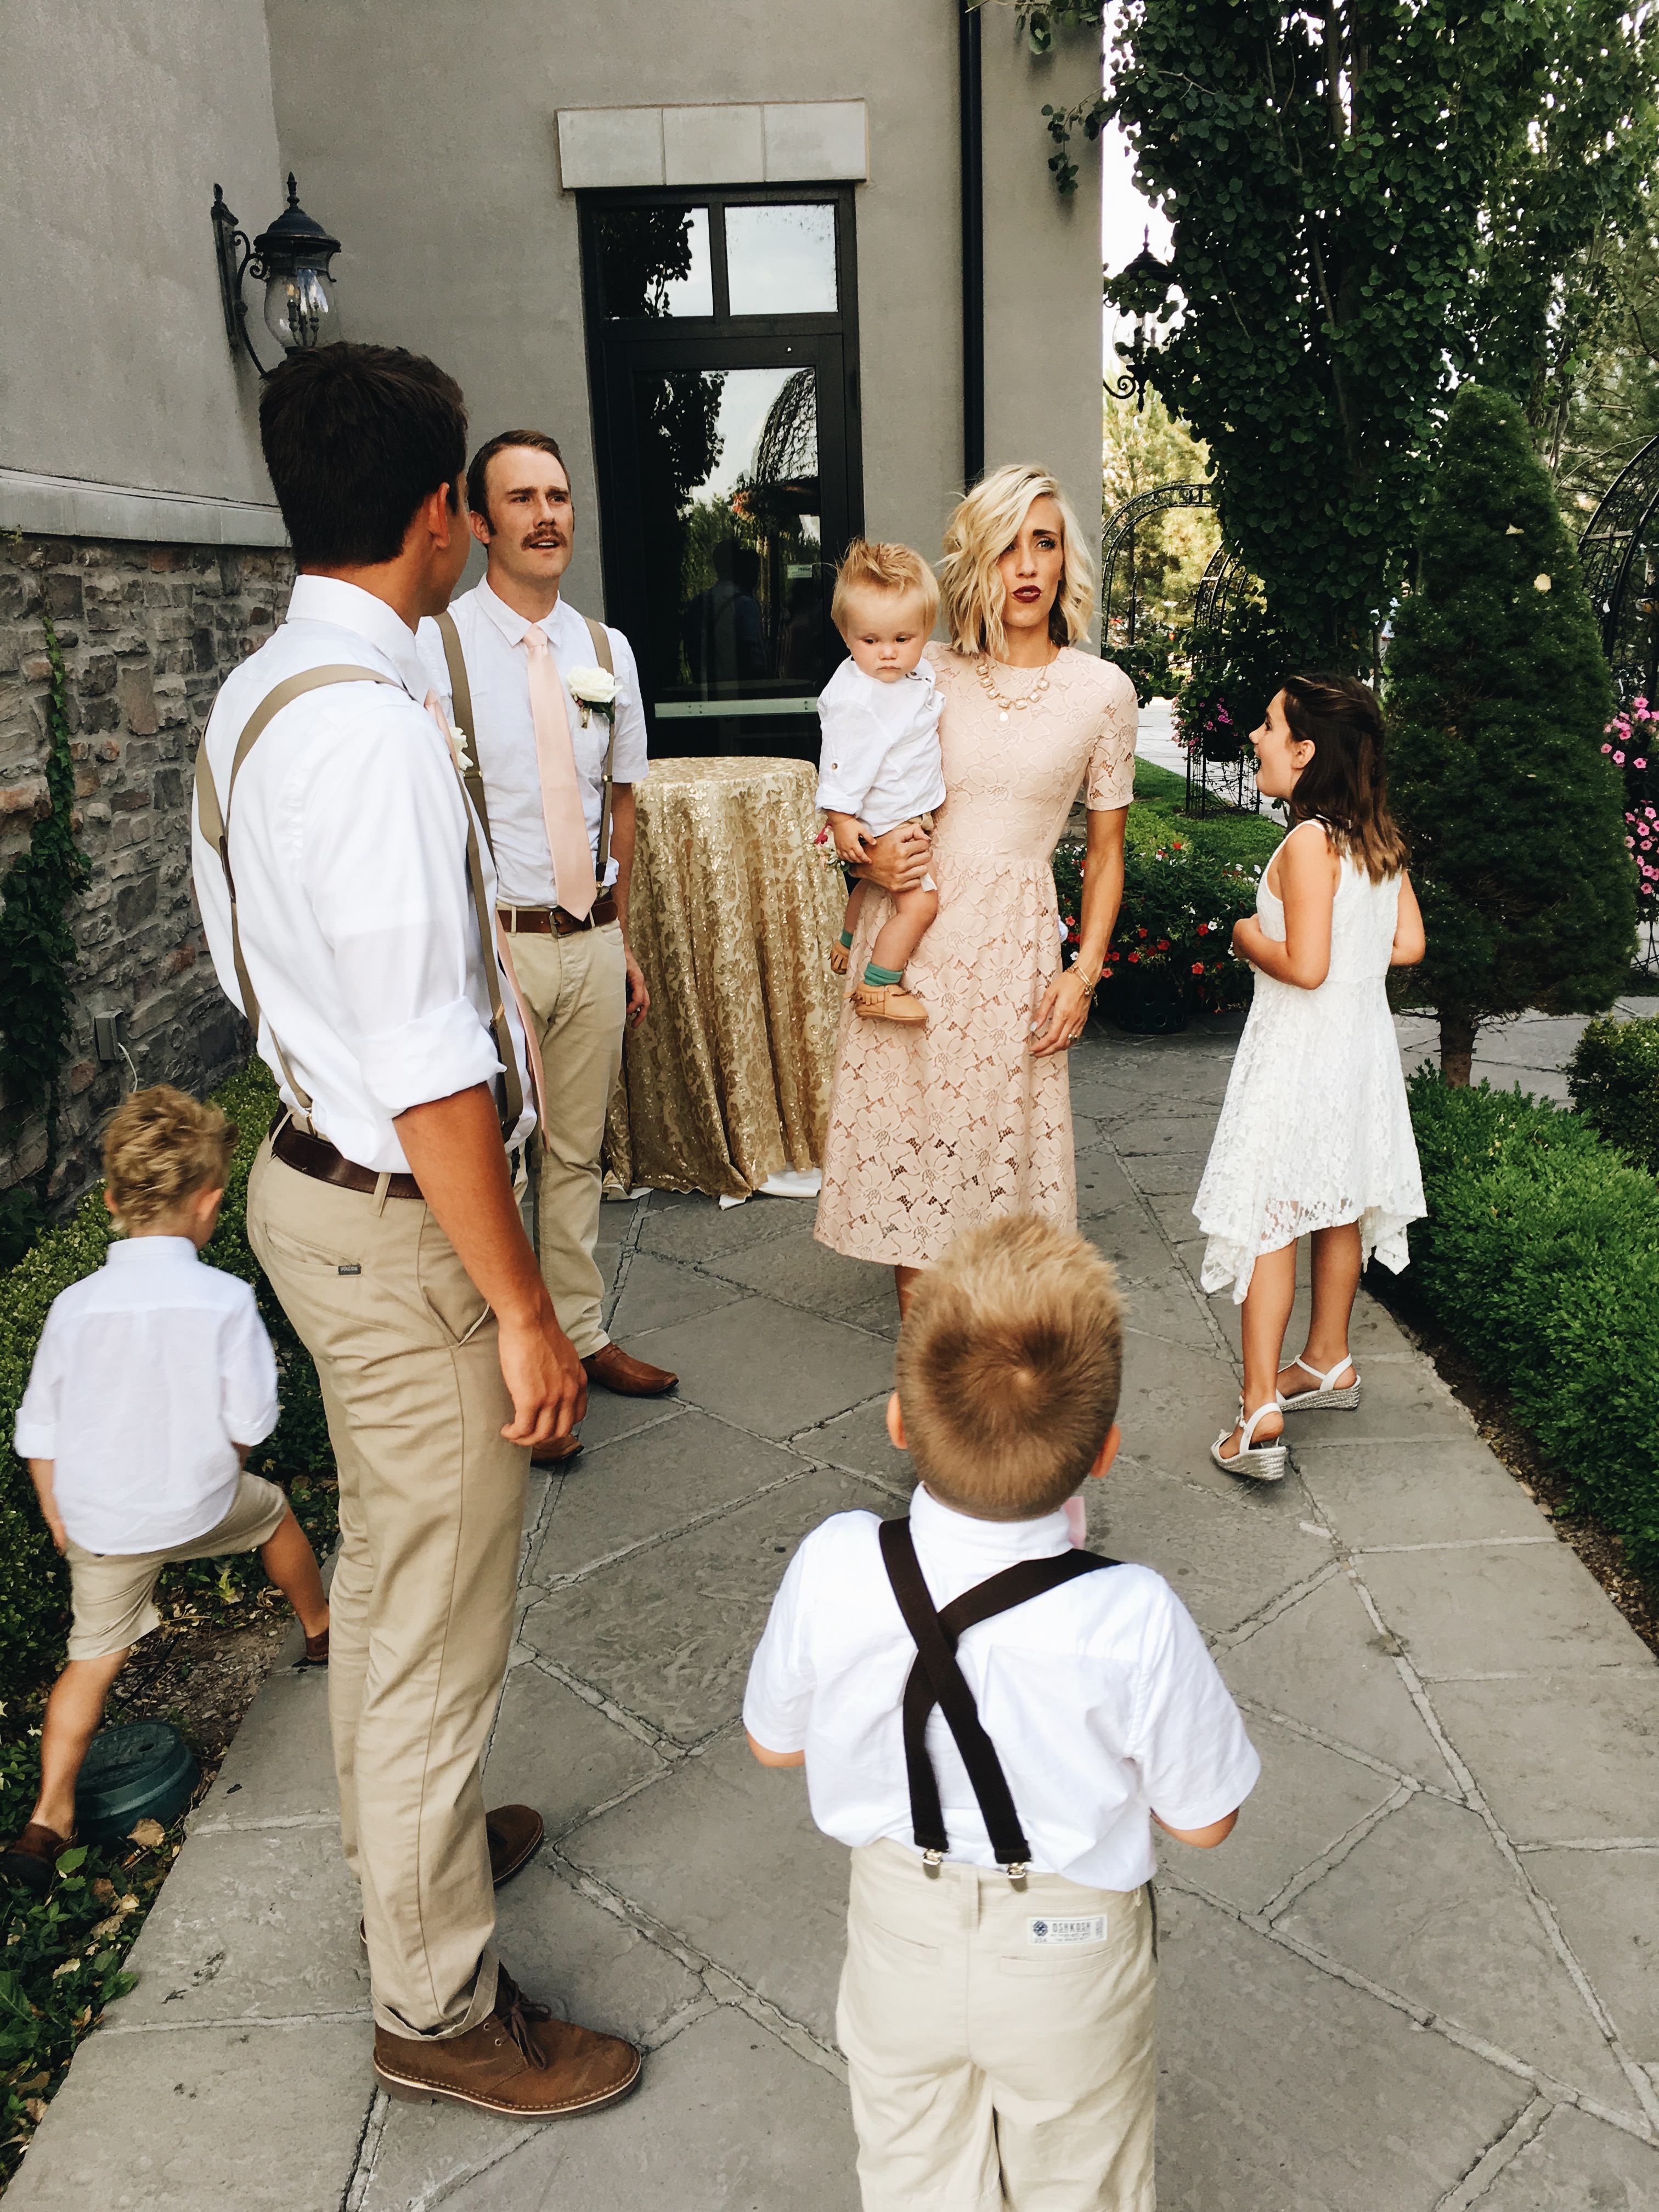 Family Wedding: Jeff & Kim Tie The Knot by social media influencer Ginger Parrish